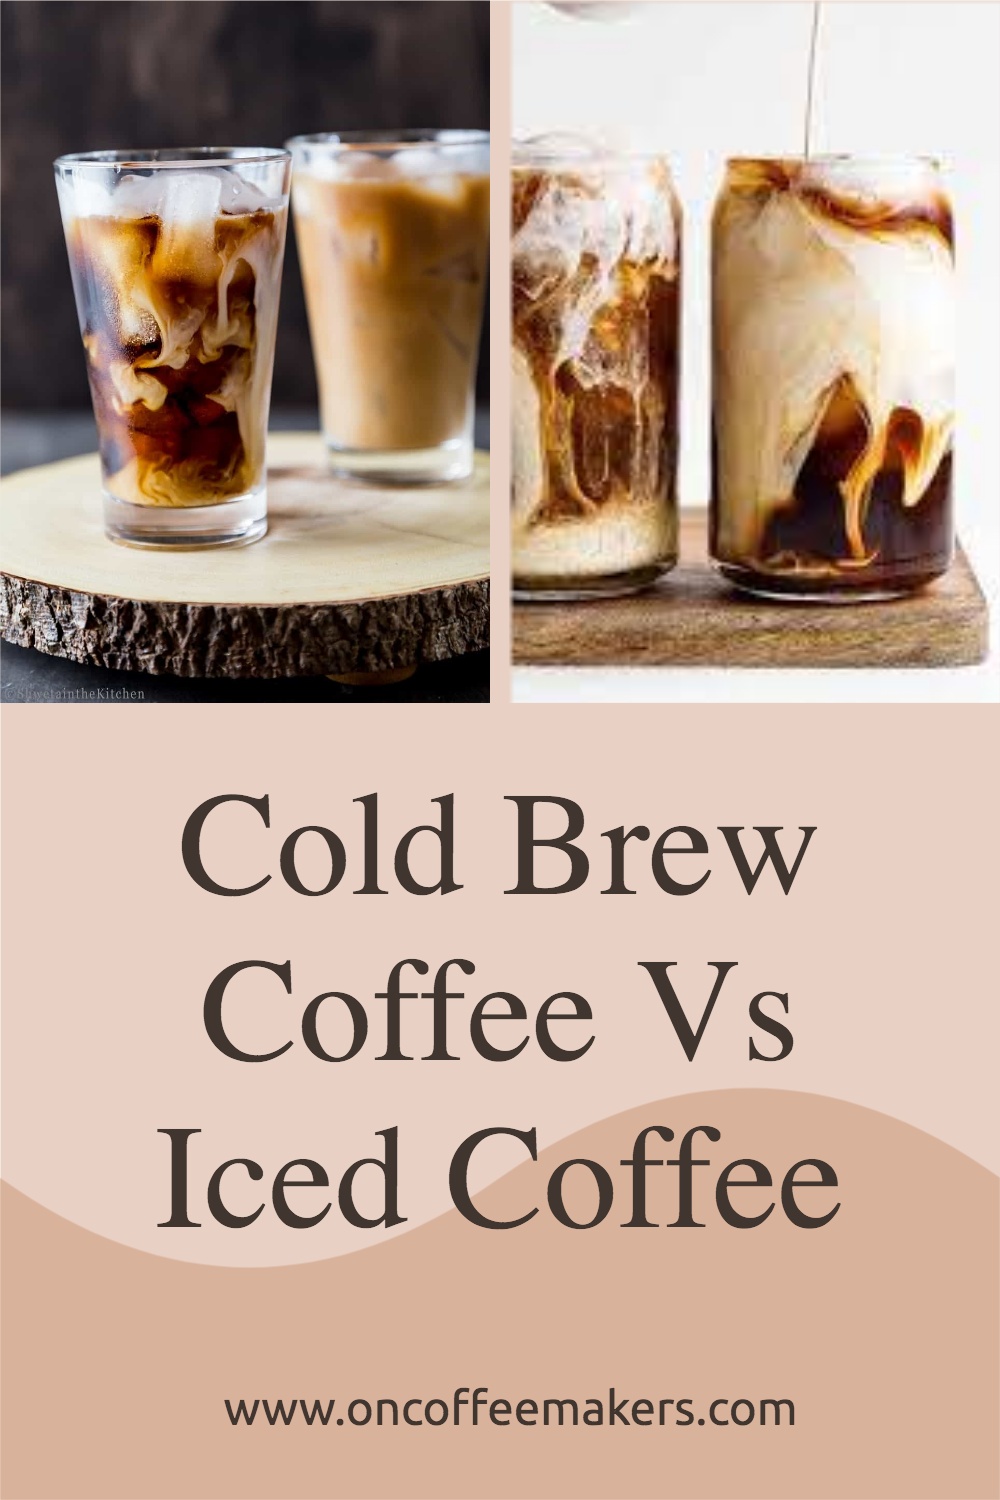 https://www.oncoffeemakers.com/images/Cold-Brew-Coffee-Vs-Iced-Coffee.jpg